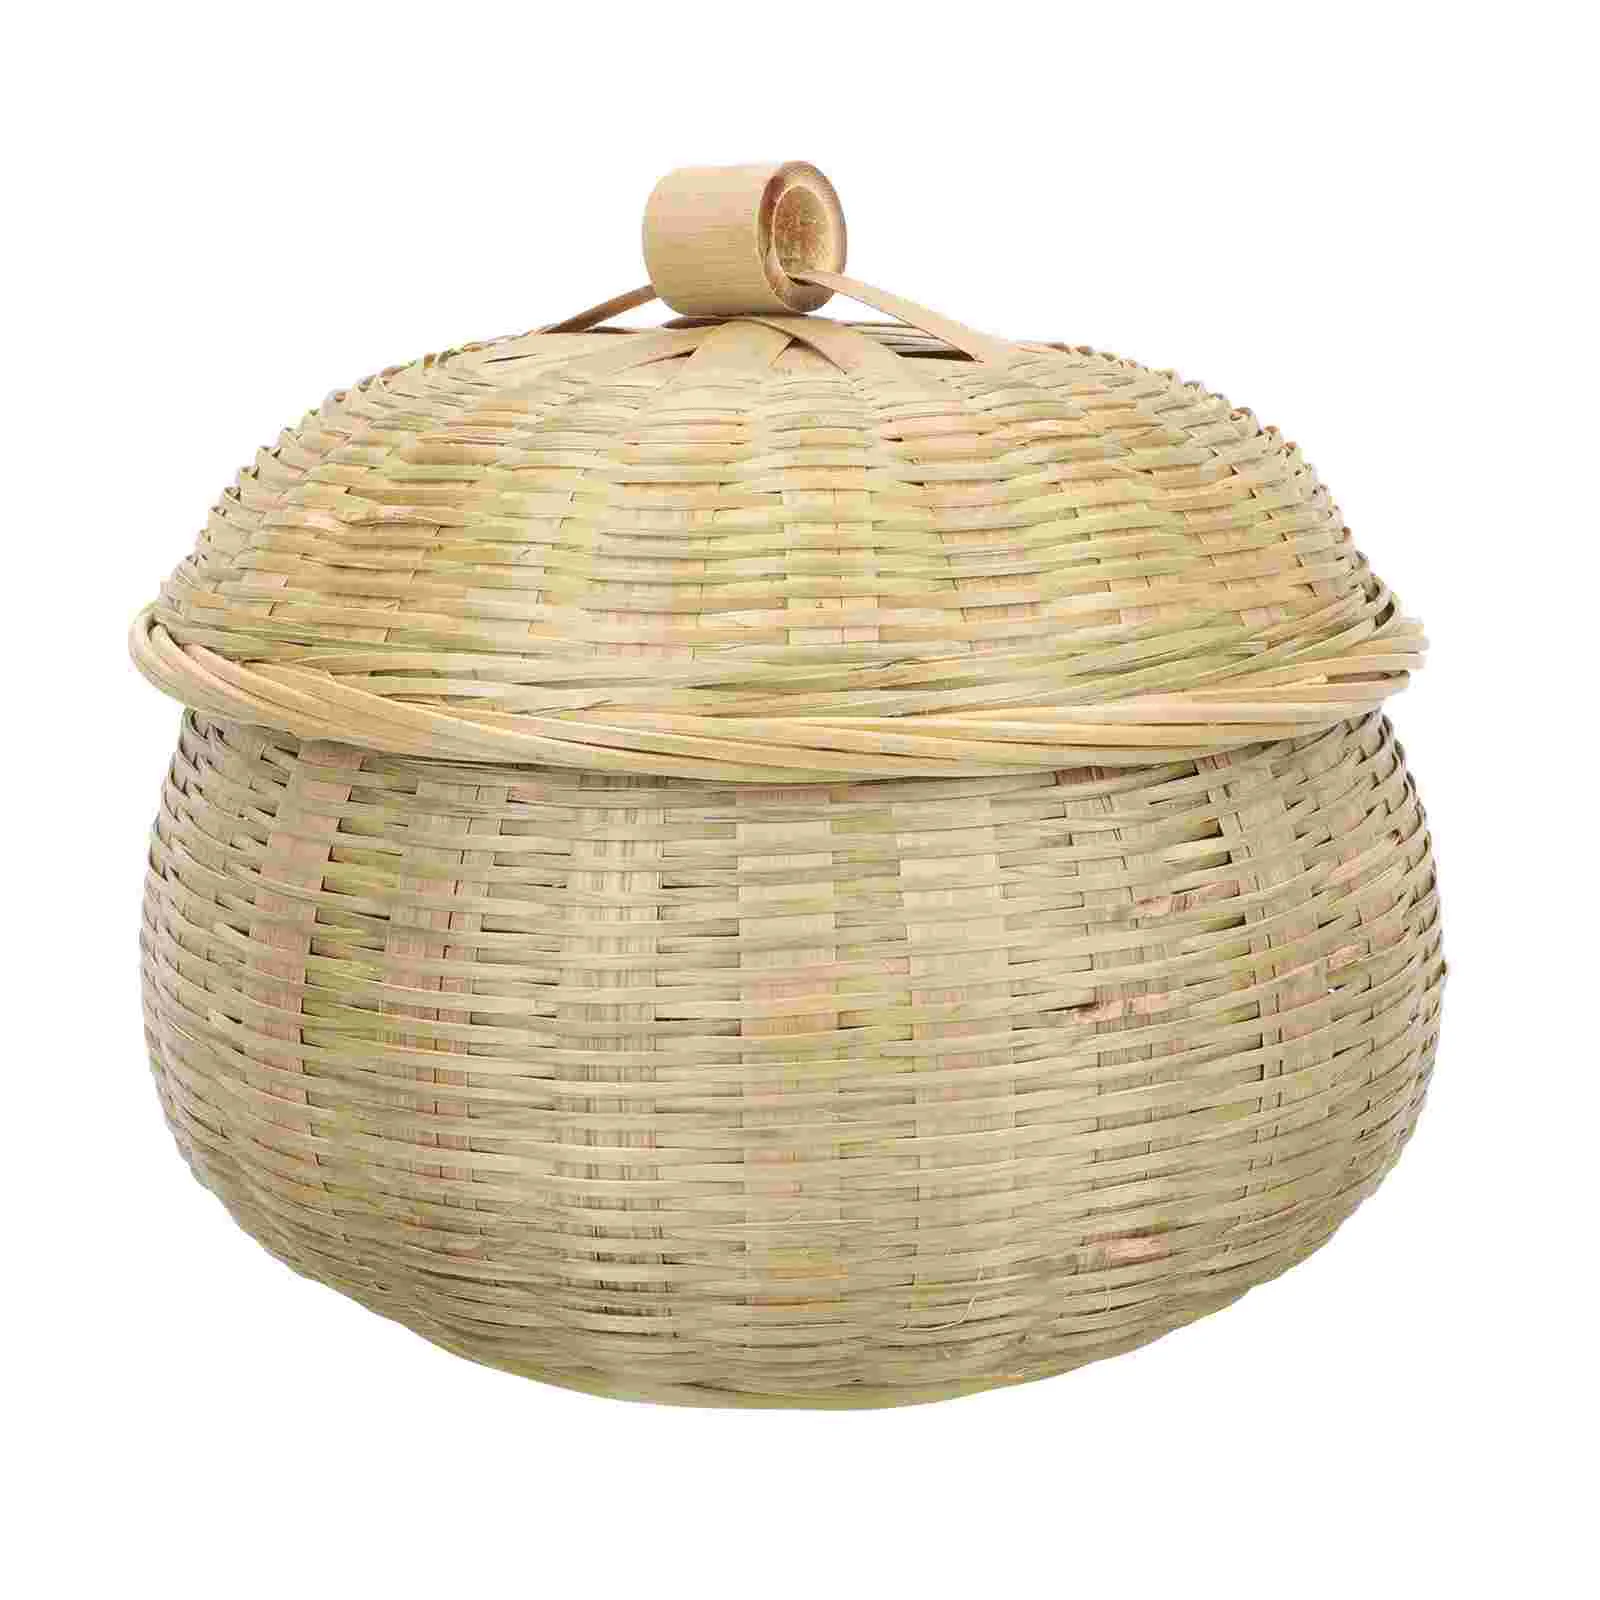 

Basket Storage Woven Baskets Egg Lid Rattan Wicker Bamboo Fruit Picnic Bread Seagrass Round Tray Lids Eggs Decorative Fresh